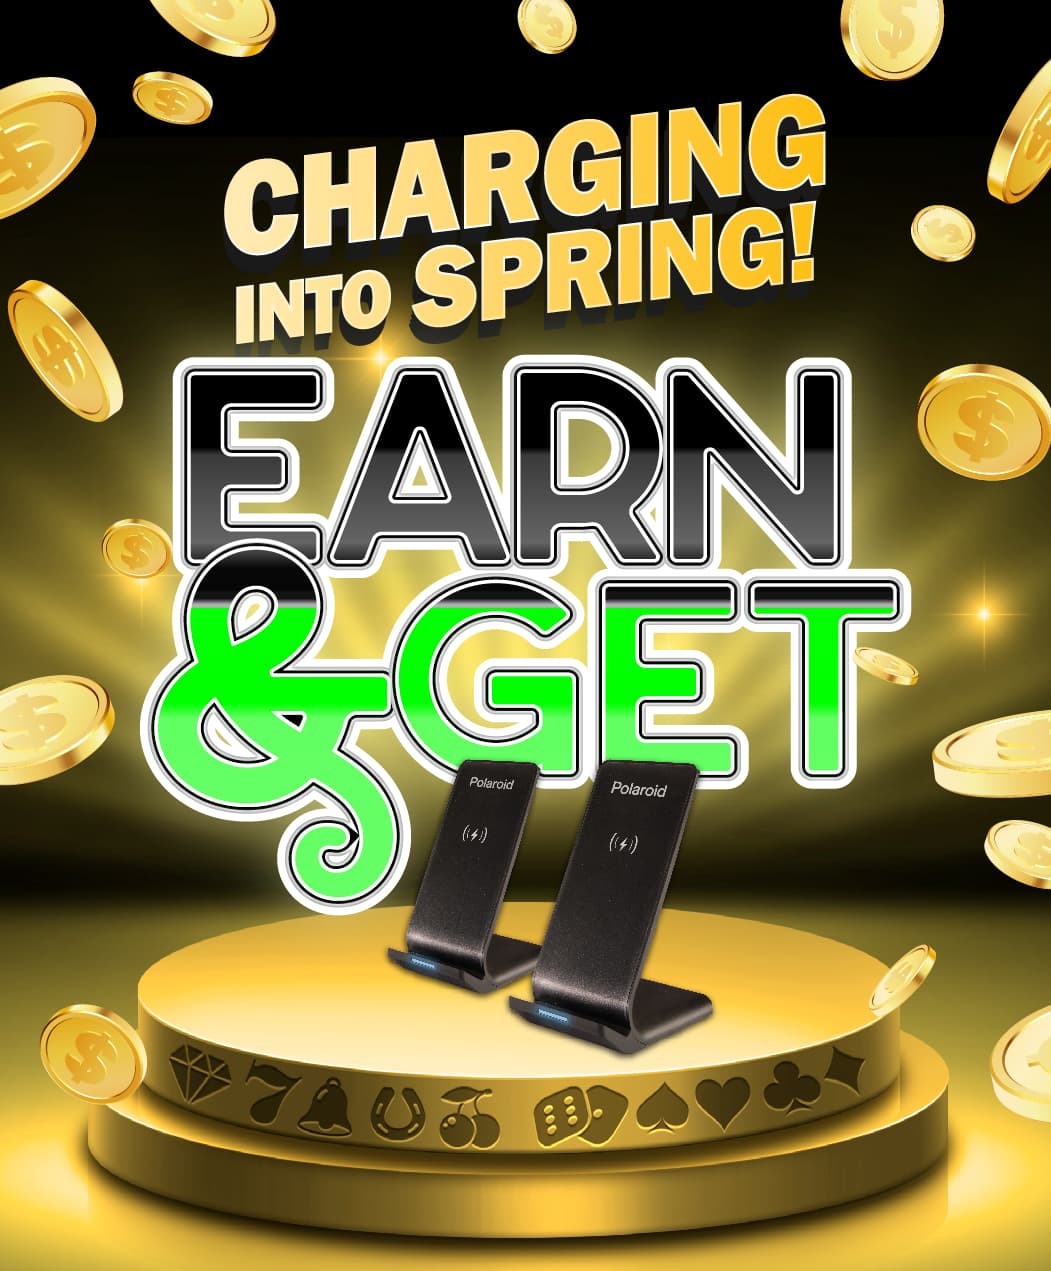 Charging Into Spring Earn & Get